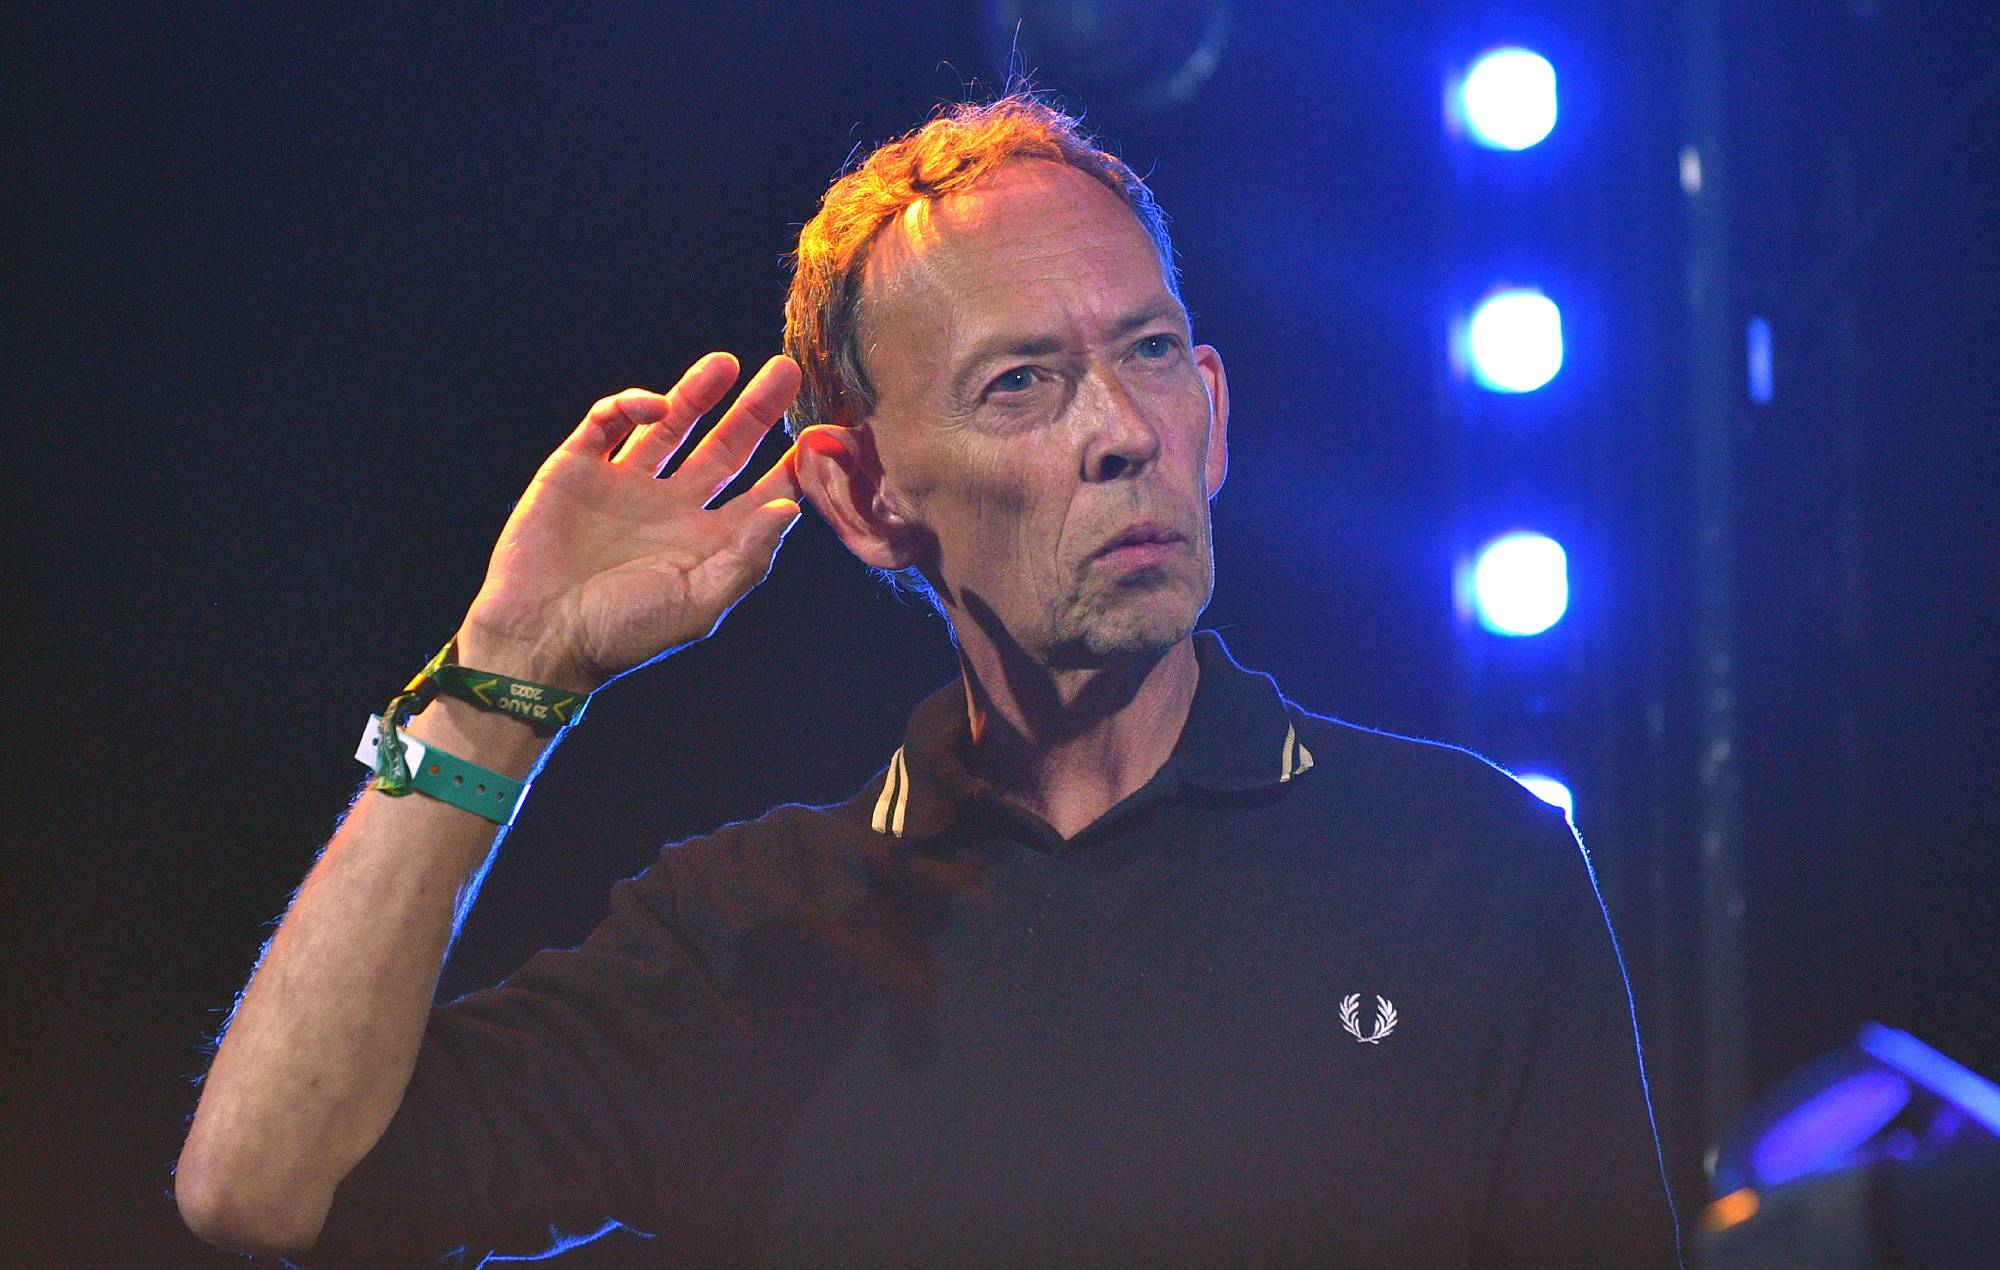 LIVE and Steve Lamacq demand action from chancellor to protect UK grassroots music venues